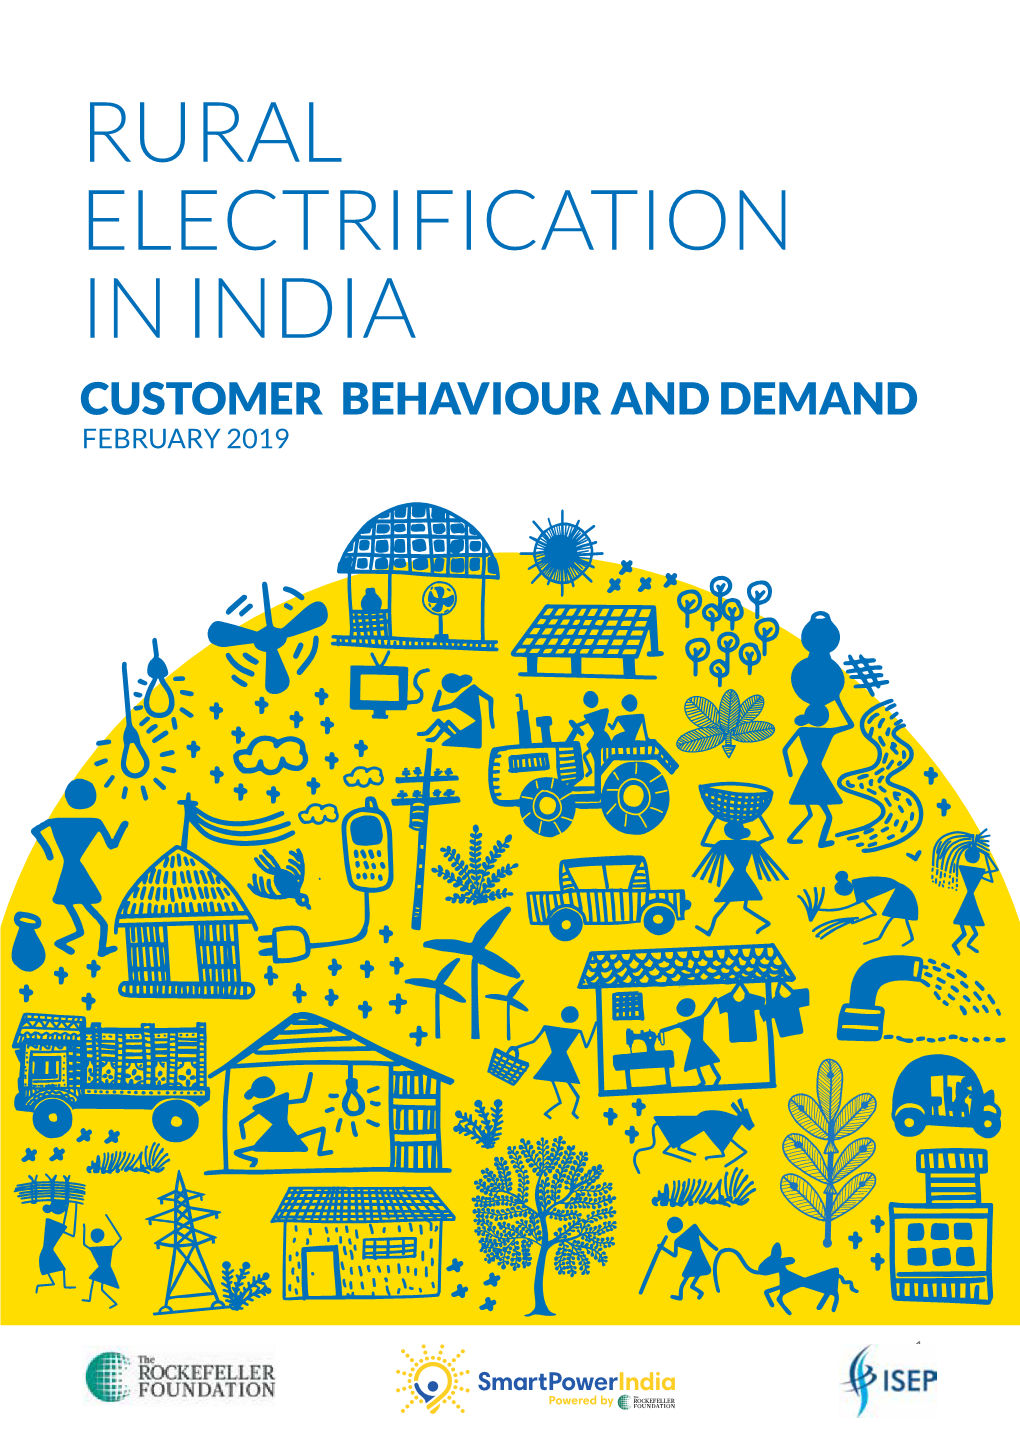 Rural Electrification in India Customer Behaviour and Demand February 2019